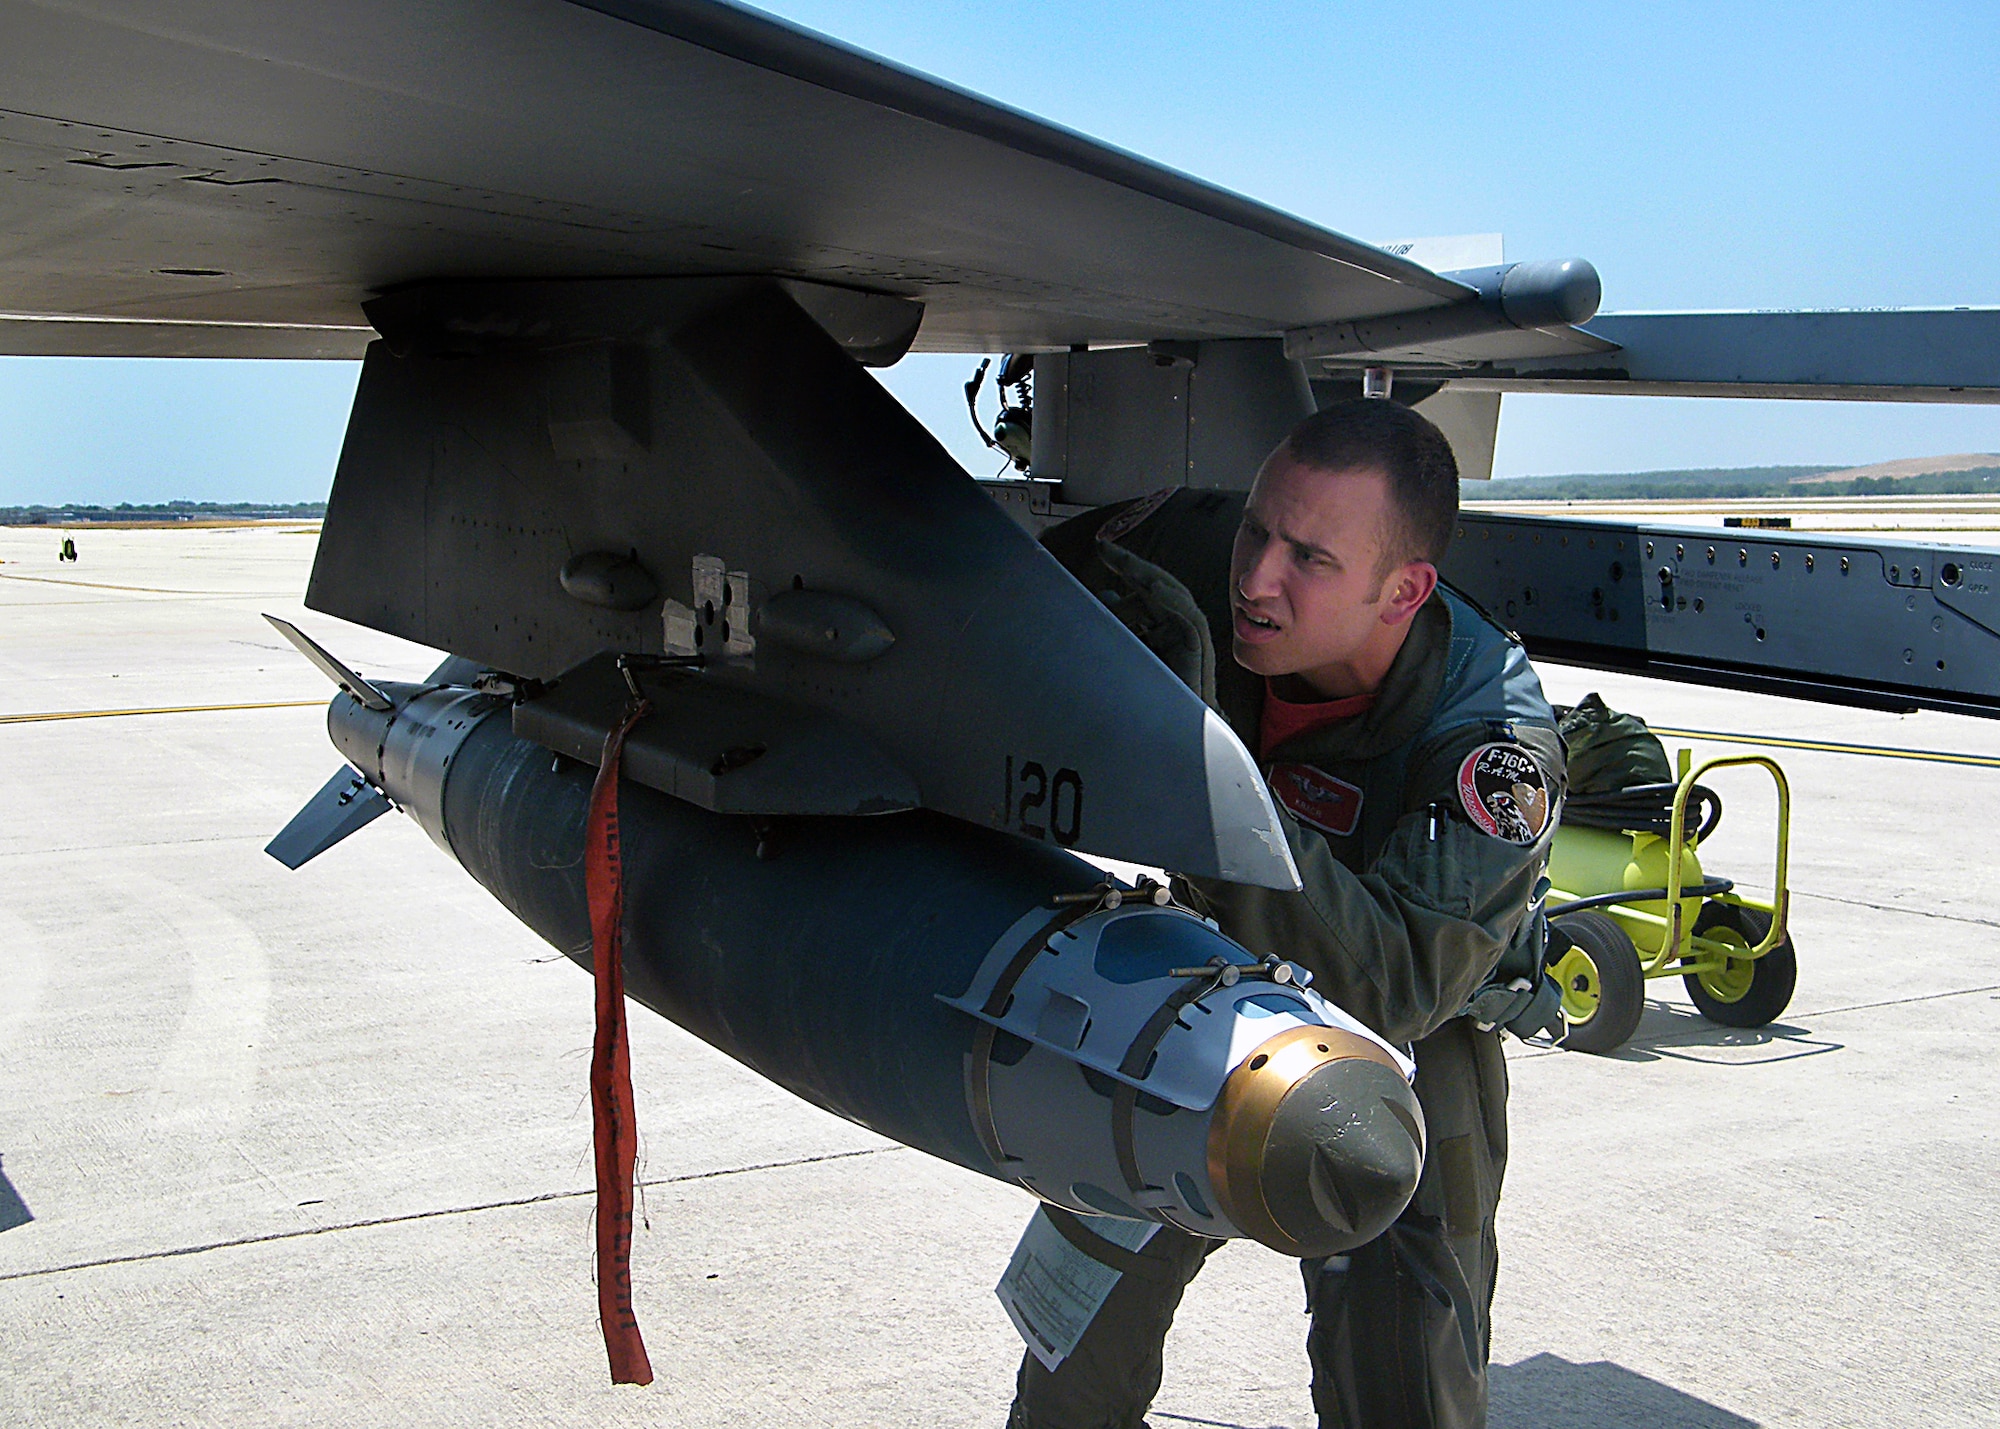 Capt. Keith “KRACR” Krejchik, an F-16 instructor pilot with the Wisconsin Air National Guard’s 115th Fighter Wing, inspects a GBU-38 Joint Direct Attack Munition (JDAM) just prior to flying from Kelly Field, Lackland Air Force Base, Texas, to the McMullen Target Complex in South Texas on July 17, 2009. Capt. Krejchik is undergoing instructor pilot upgrade training with the 149th Fighter Wing, Texas Air National Guard. (Air National Guard photo/SSgt Phil Fountain)(RELEASED)

